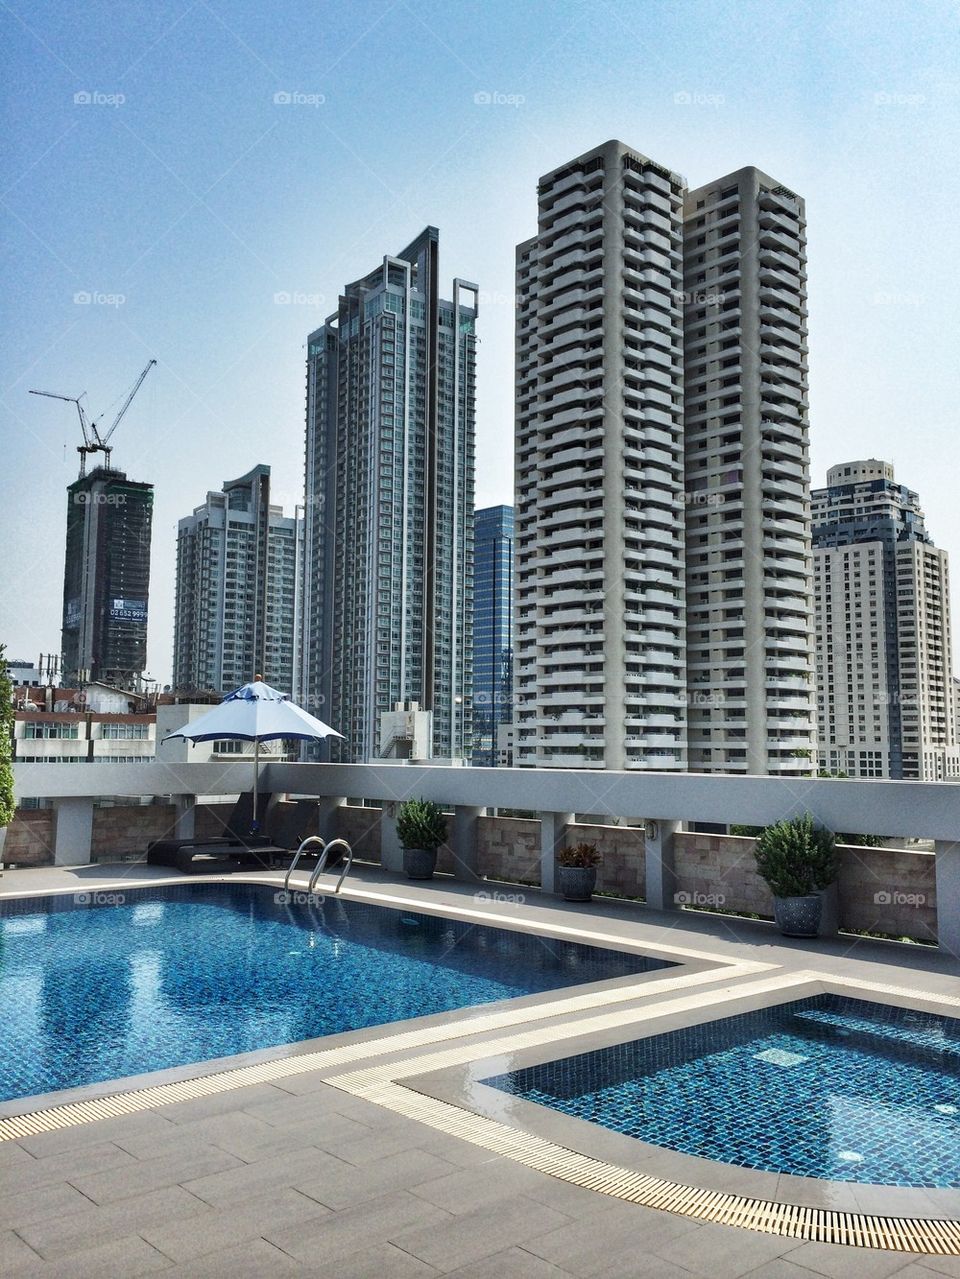 Bangkok city view from a pool deck